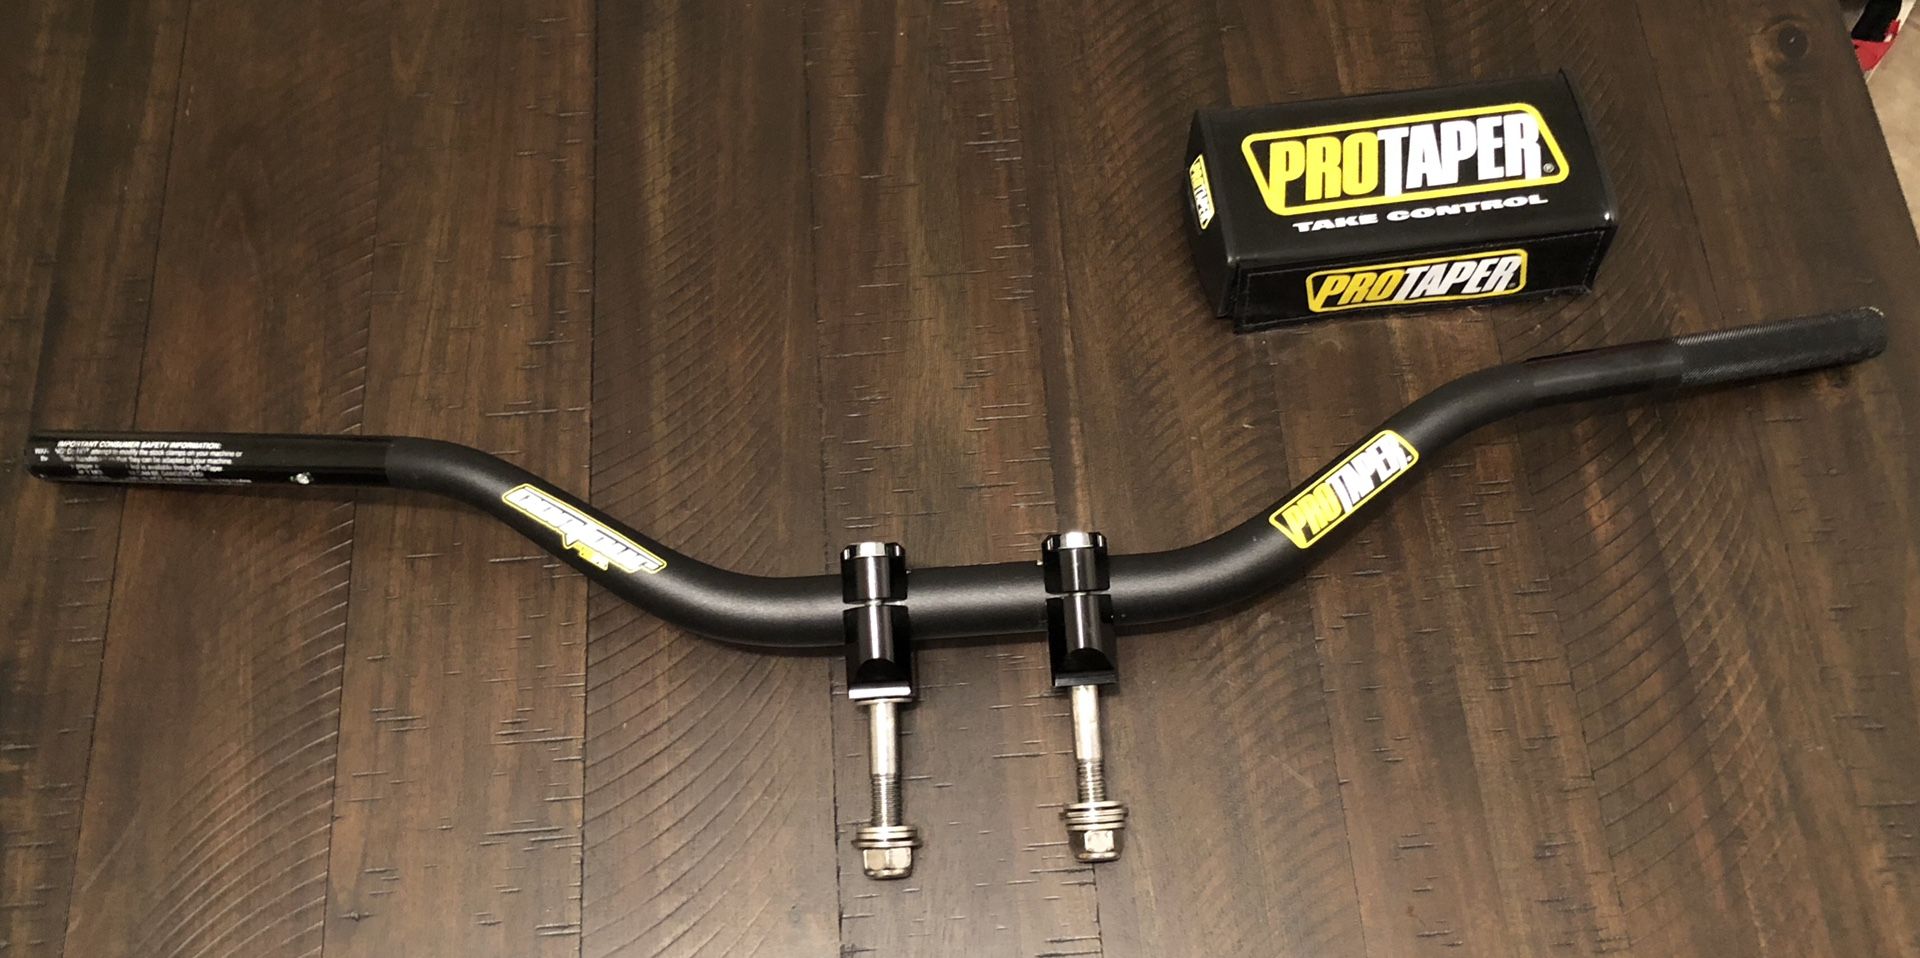 Wide ProTaper handle bars for Grom